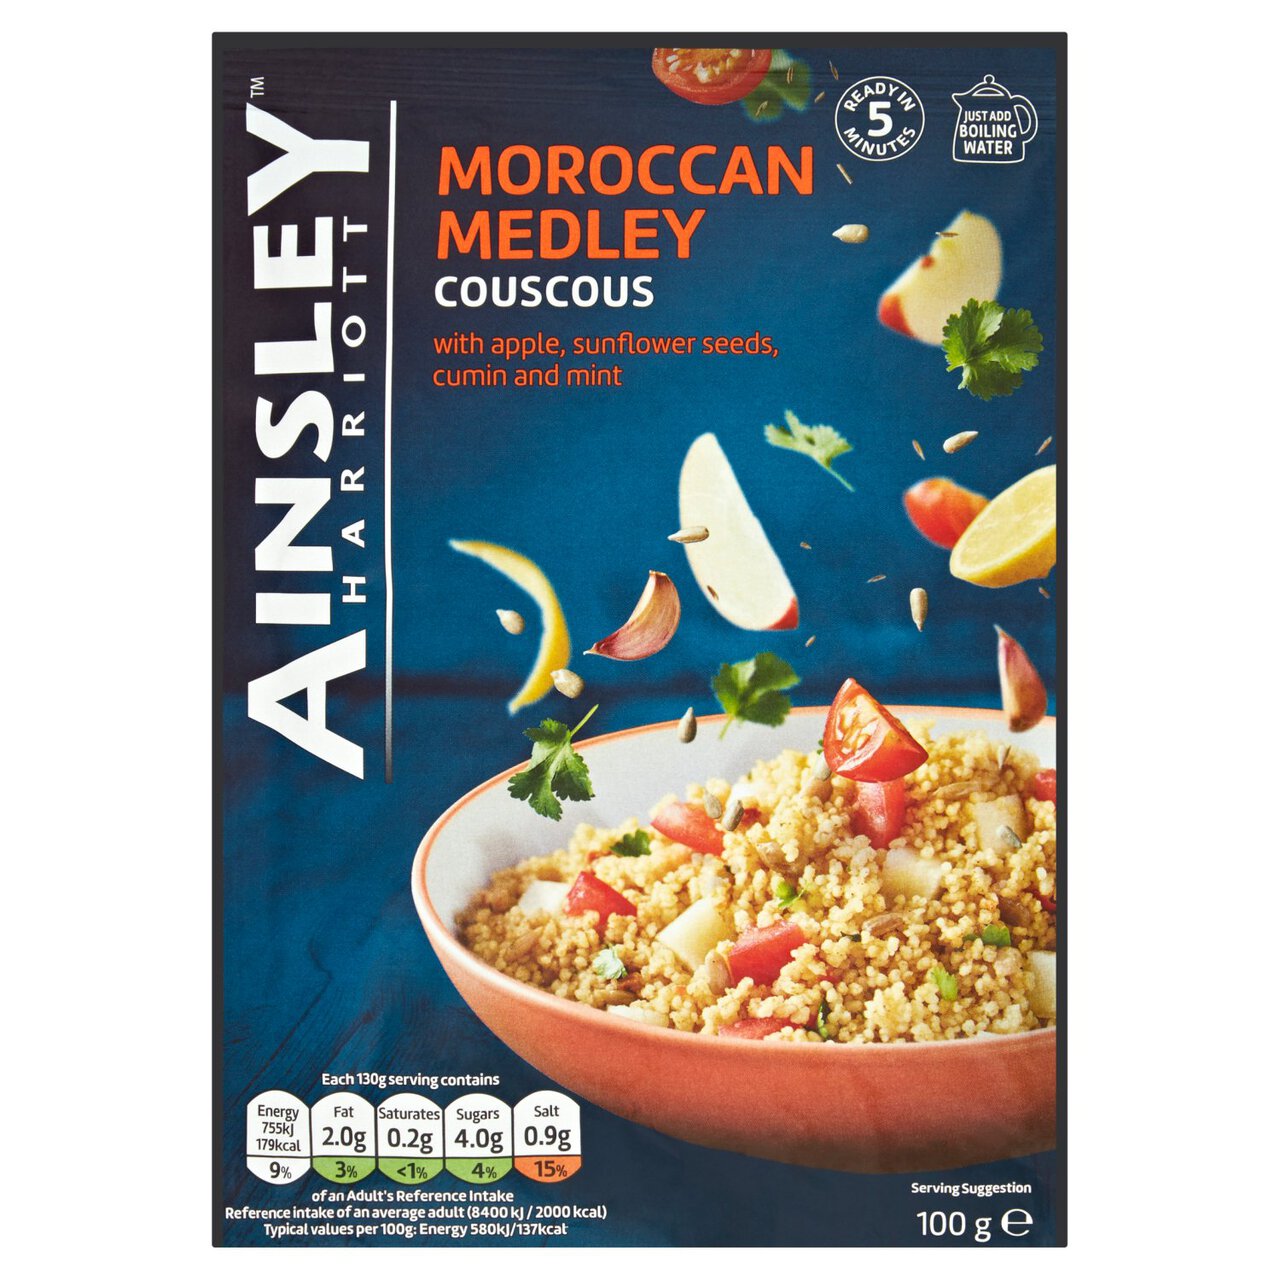 Ainsley Harriott Moroccan Medley Cous Cous 100g